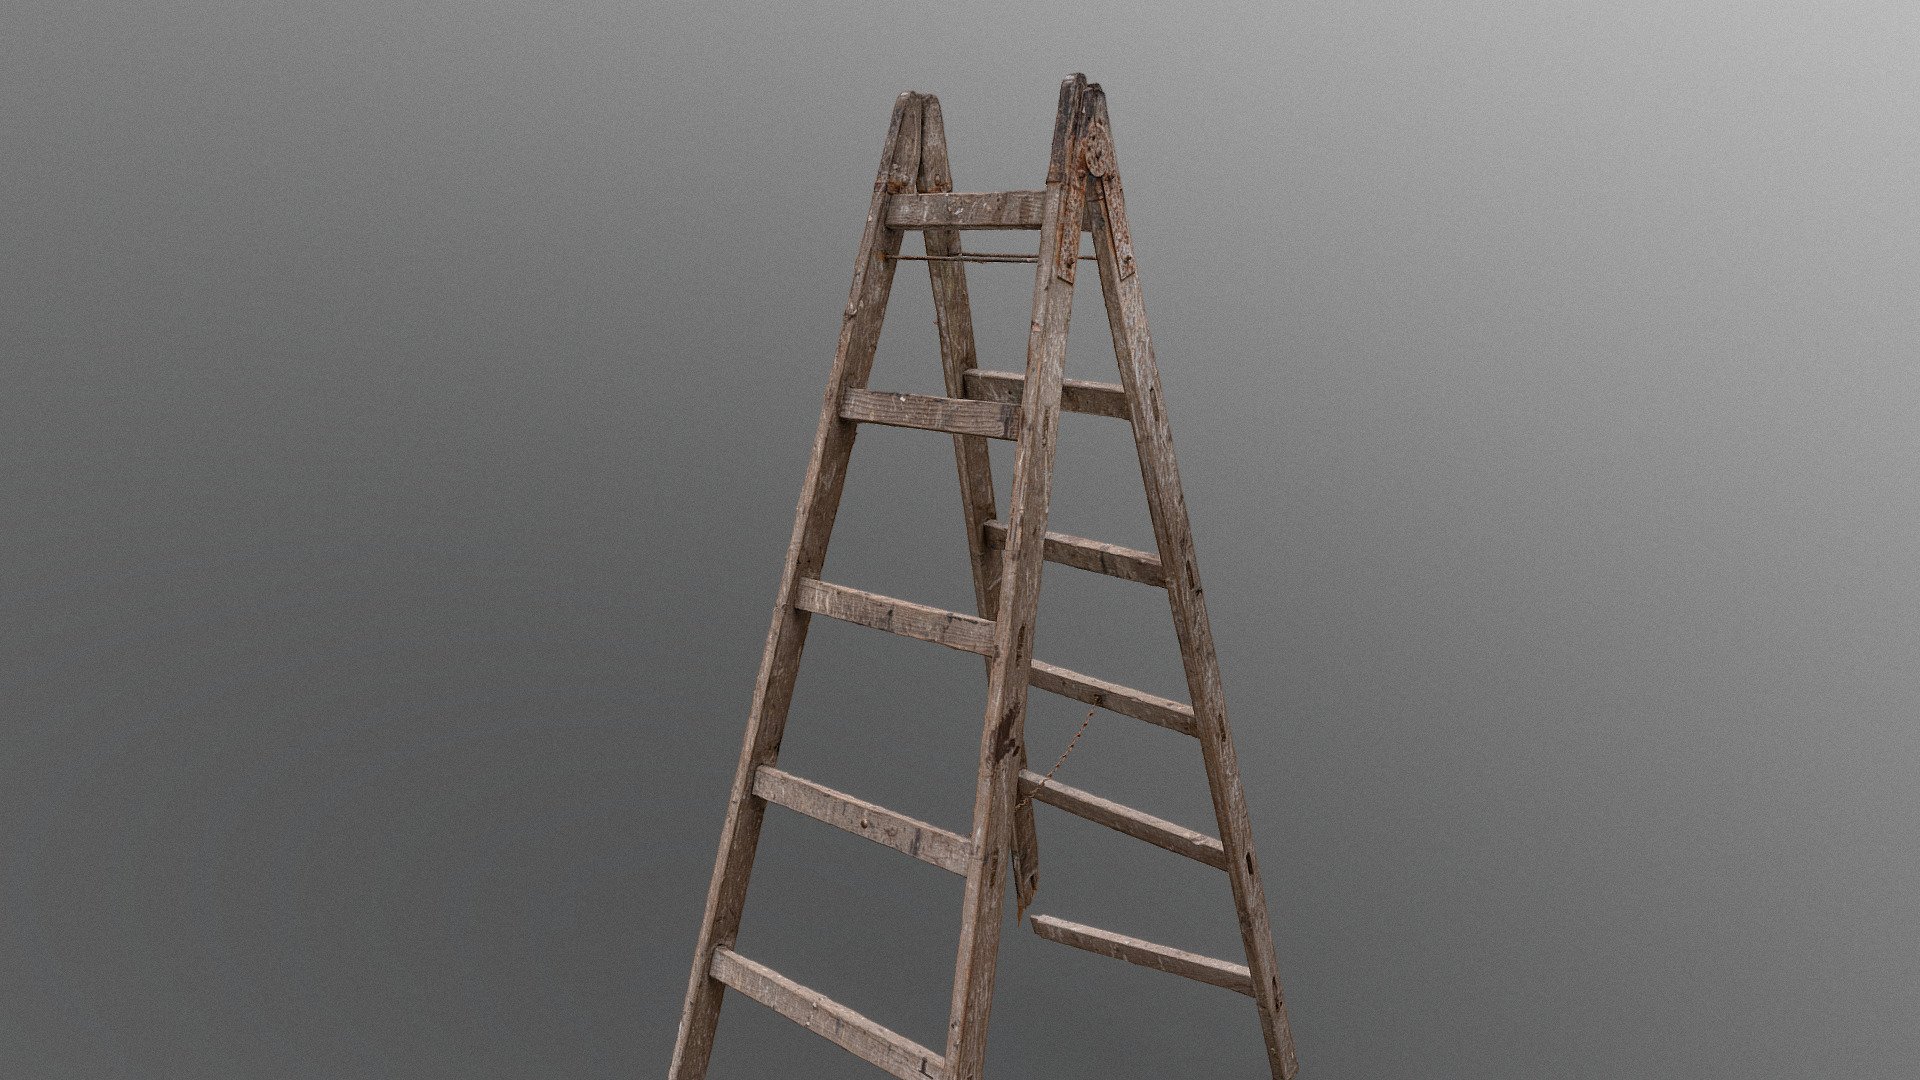 Old dirty rusty home Wooden step ladder with splatters antique vintage with broken step

photogrammetry scan (280x36mp), 2x8k textures + HD normals - Wooden step ladder vintage - Buy Royalty Free 3D model by axonite 3d model